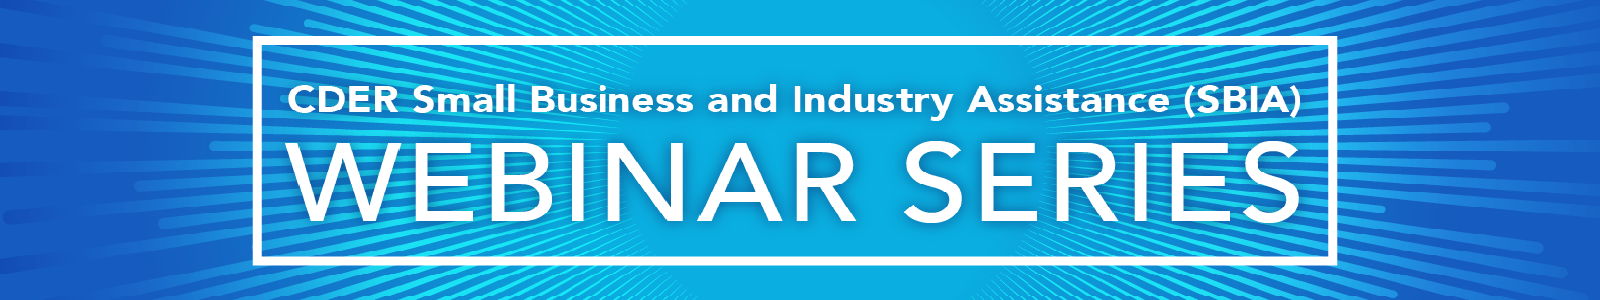 CDER Small Business and Industry Assistance Webinar Series